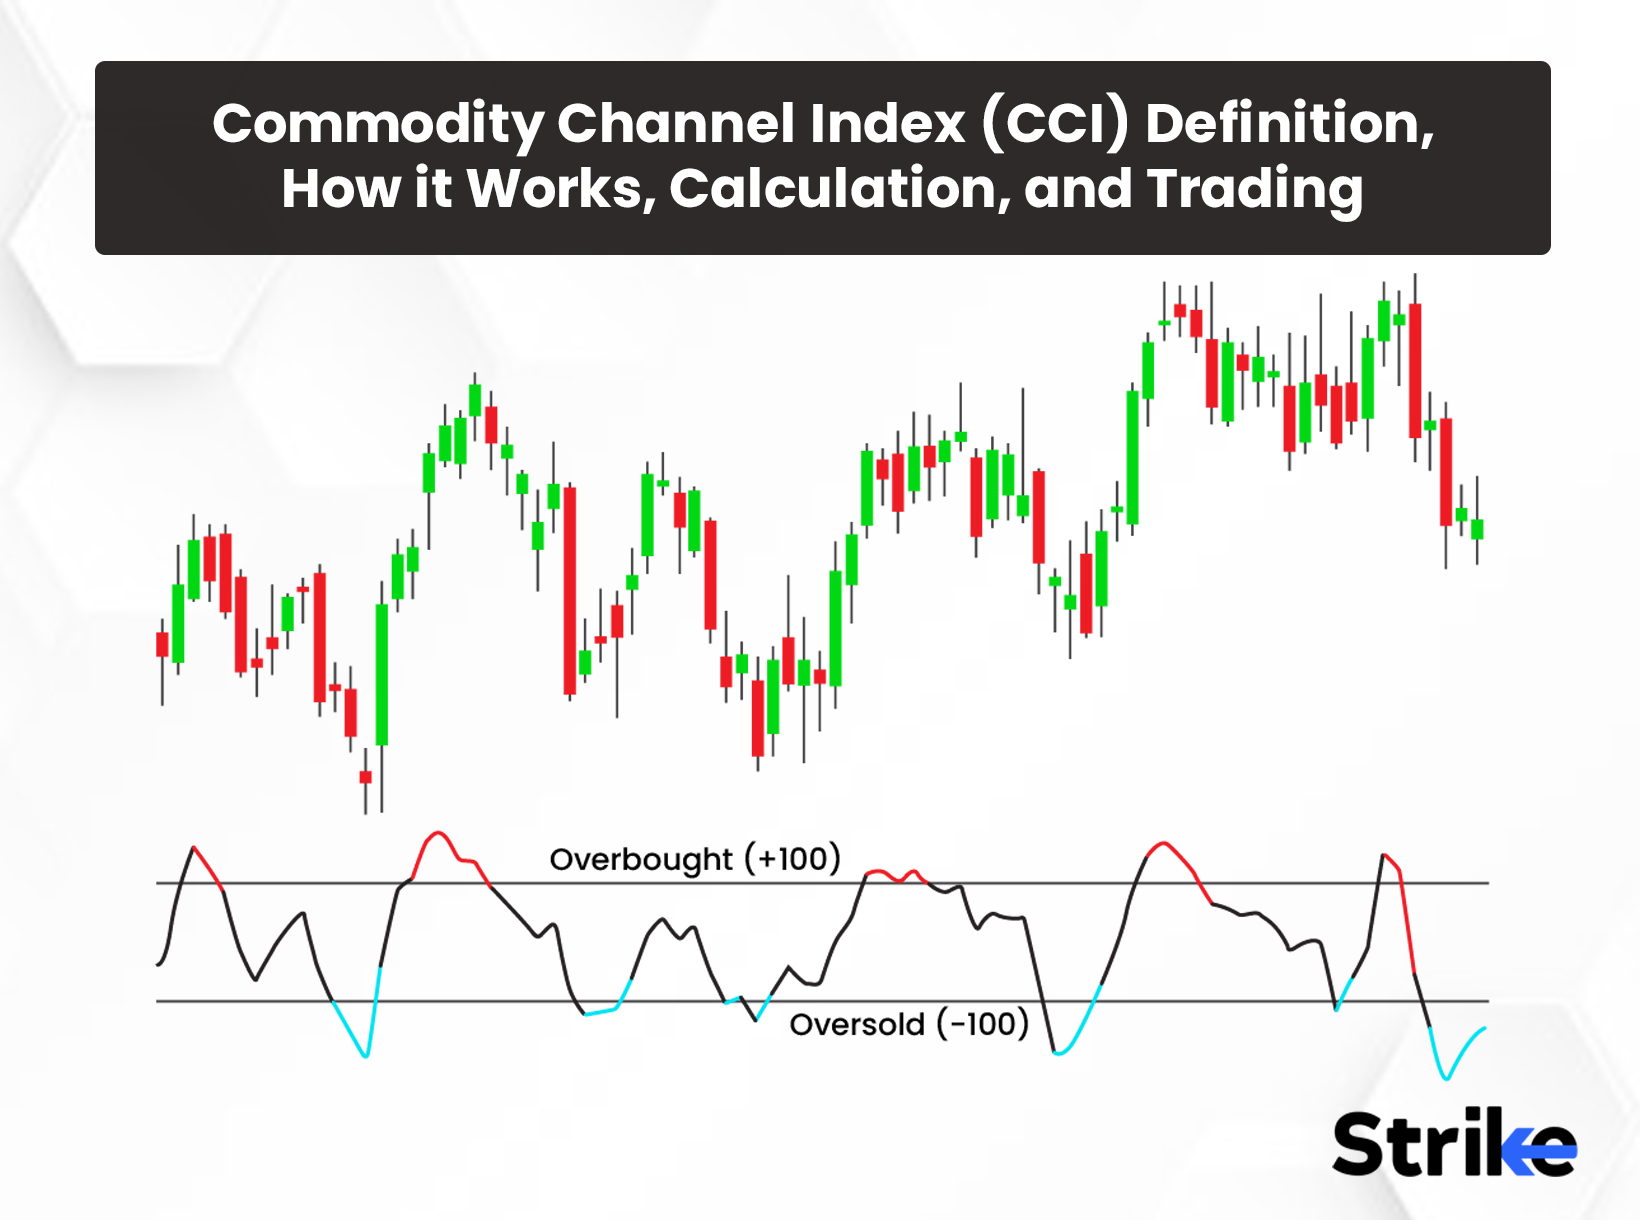 Commodity Channel Index (CCI): Definition, How it Works, Calculation, and Trading